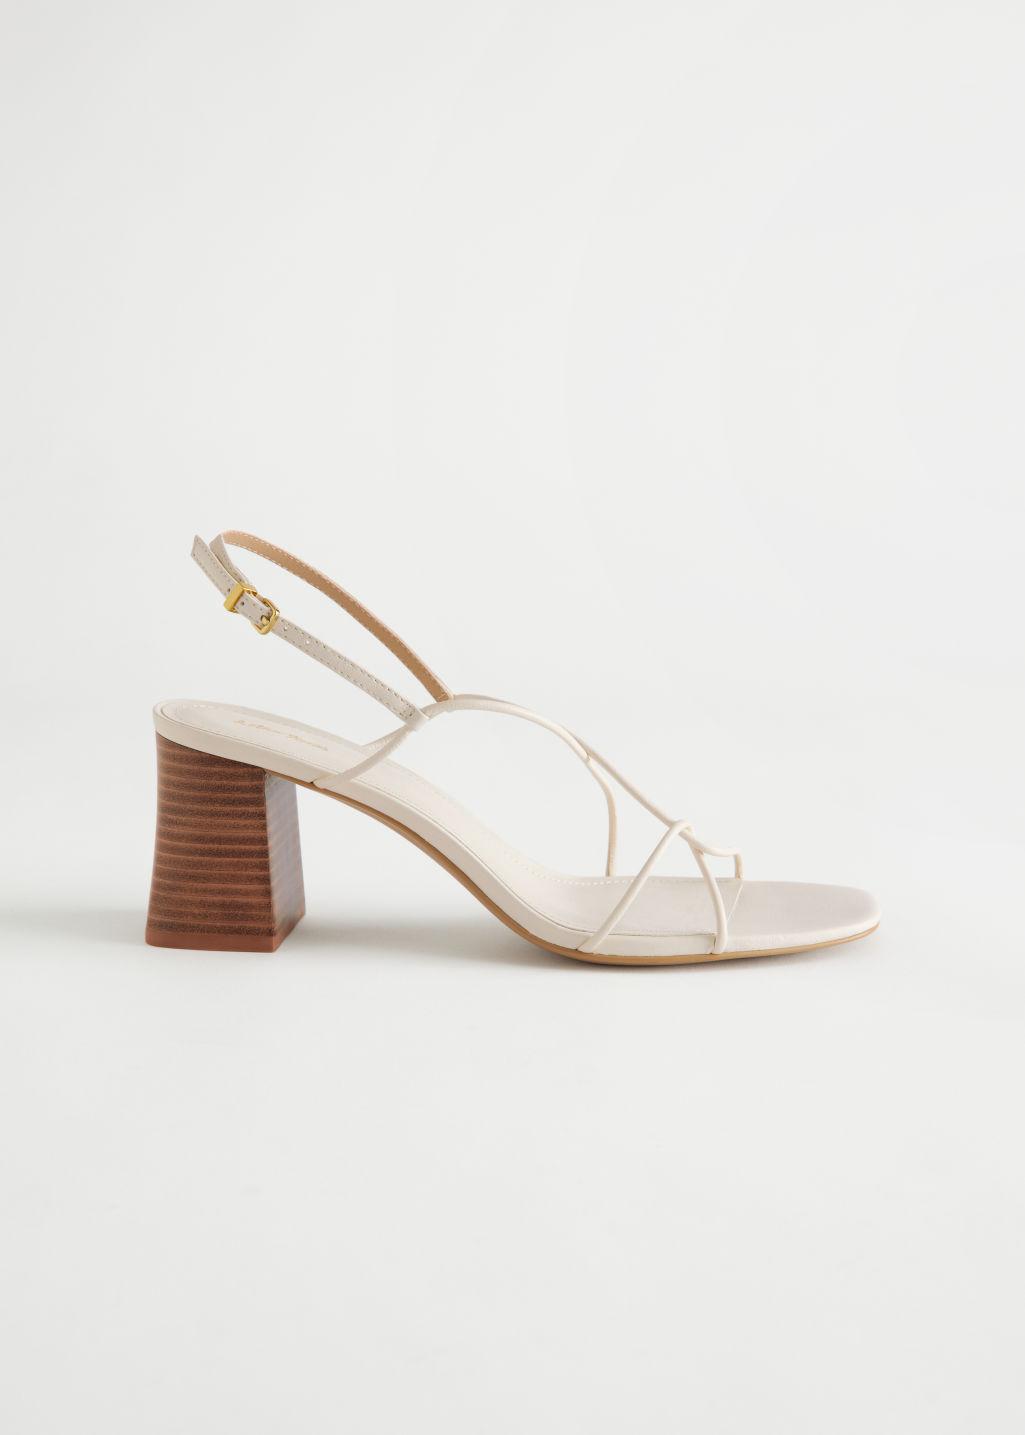 & Other Stories Strappy Leather Heeled Sandal in White | Lyst